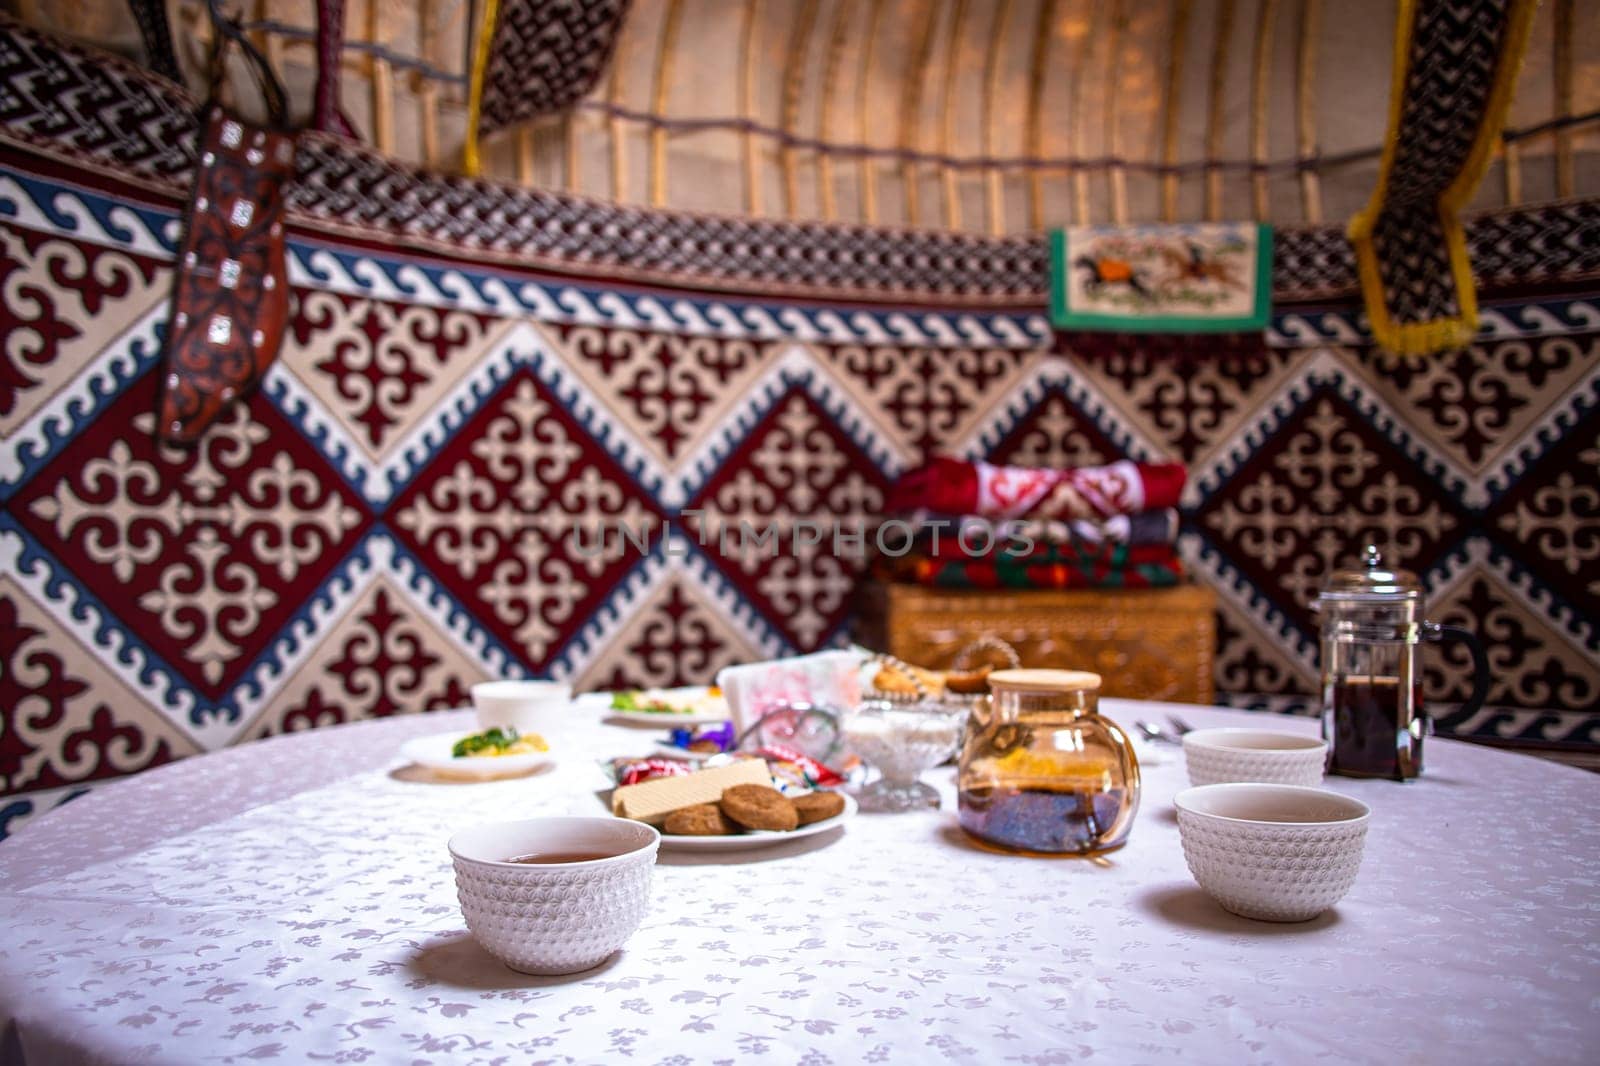 Cozy Yurt Interior with Traditional Meal Table Setup and Colorful Decor by Pukhovskiy